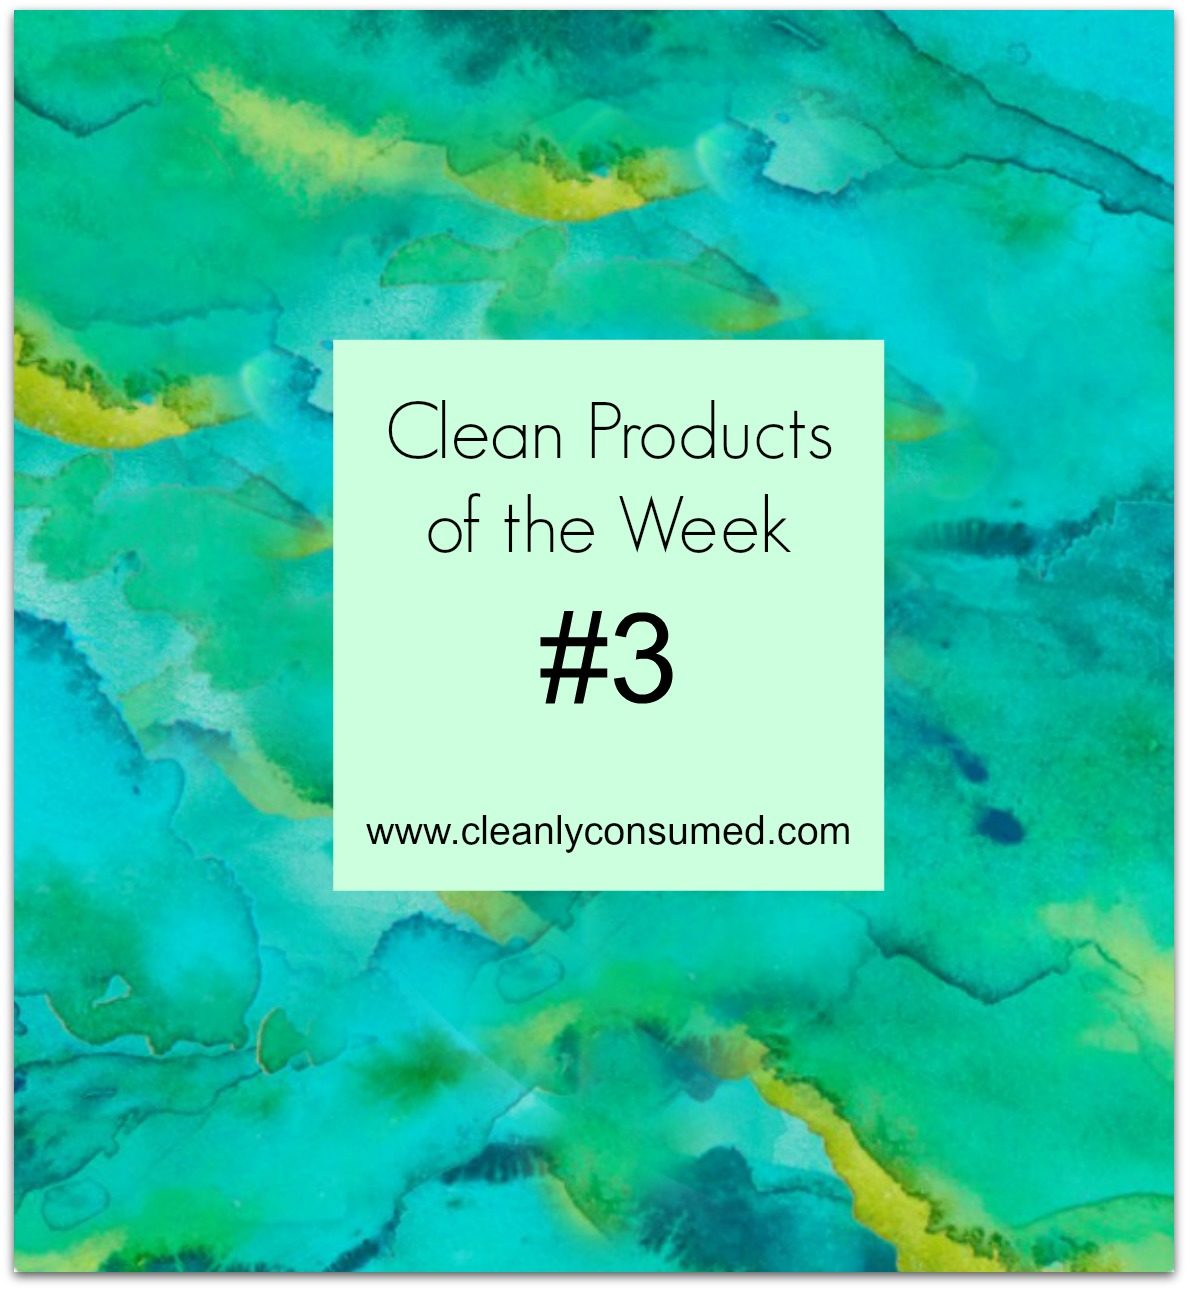 Products of the Week #3- Get ready for some clean products!